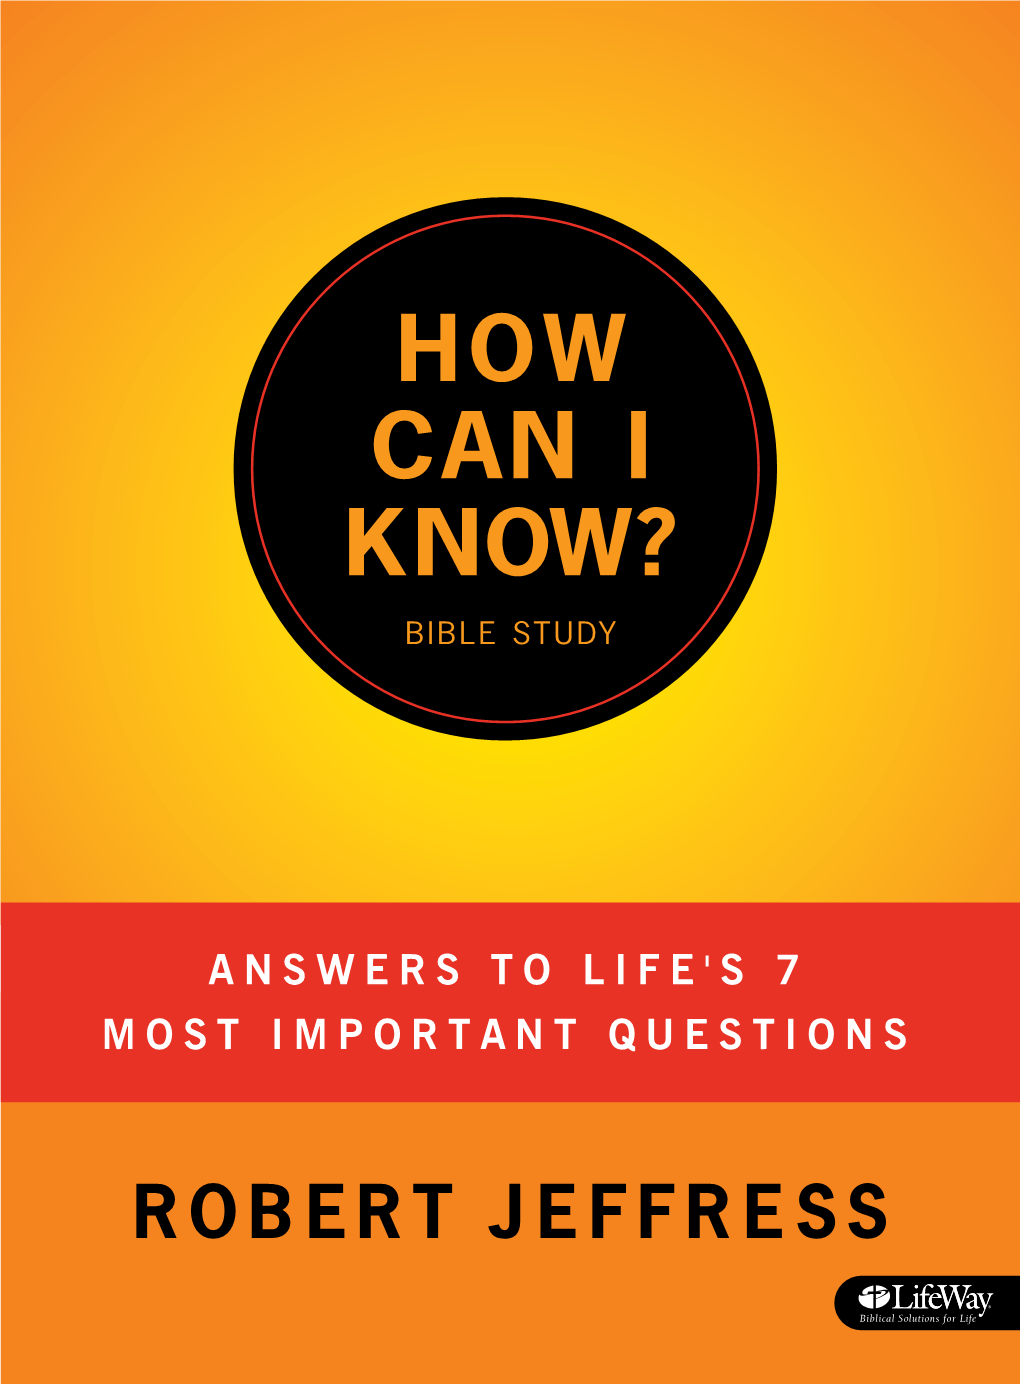 HOW CAN I KNOW? BIBLE STUDY Jeffress